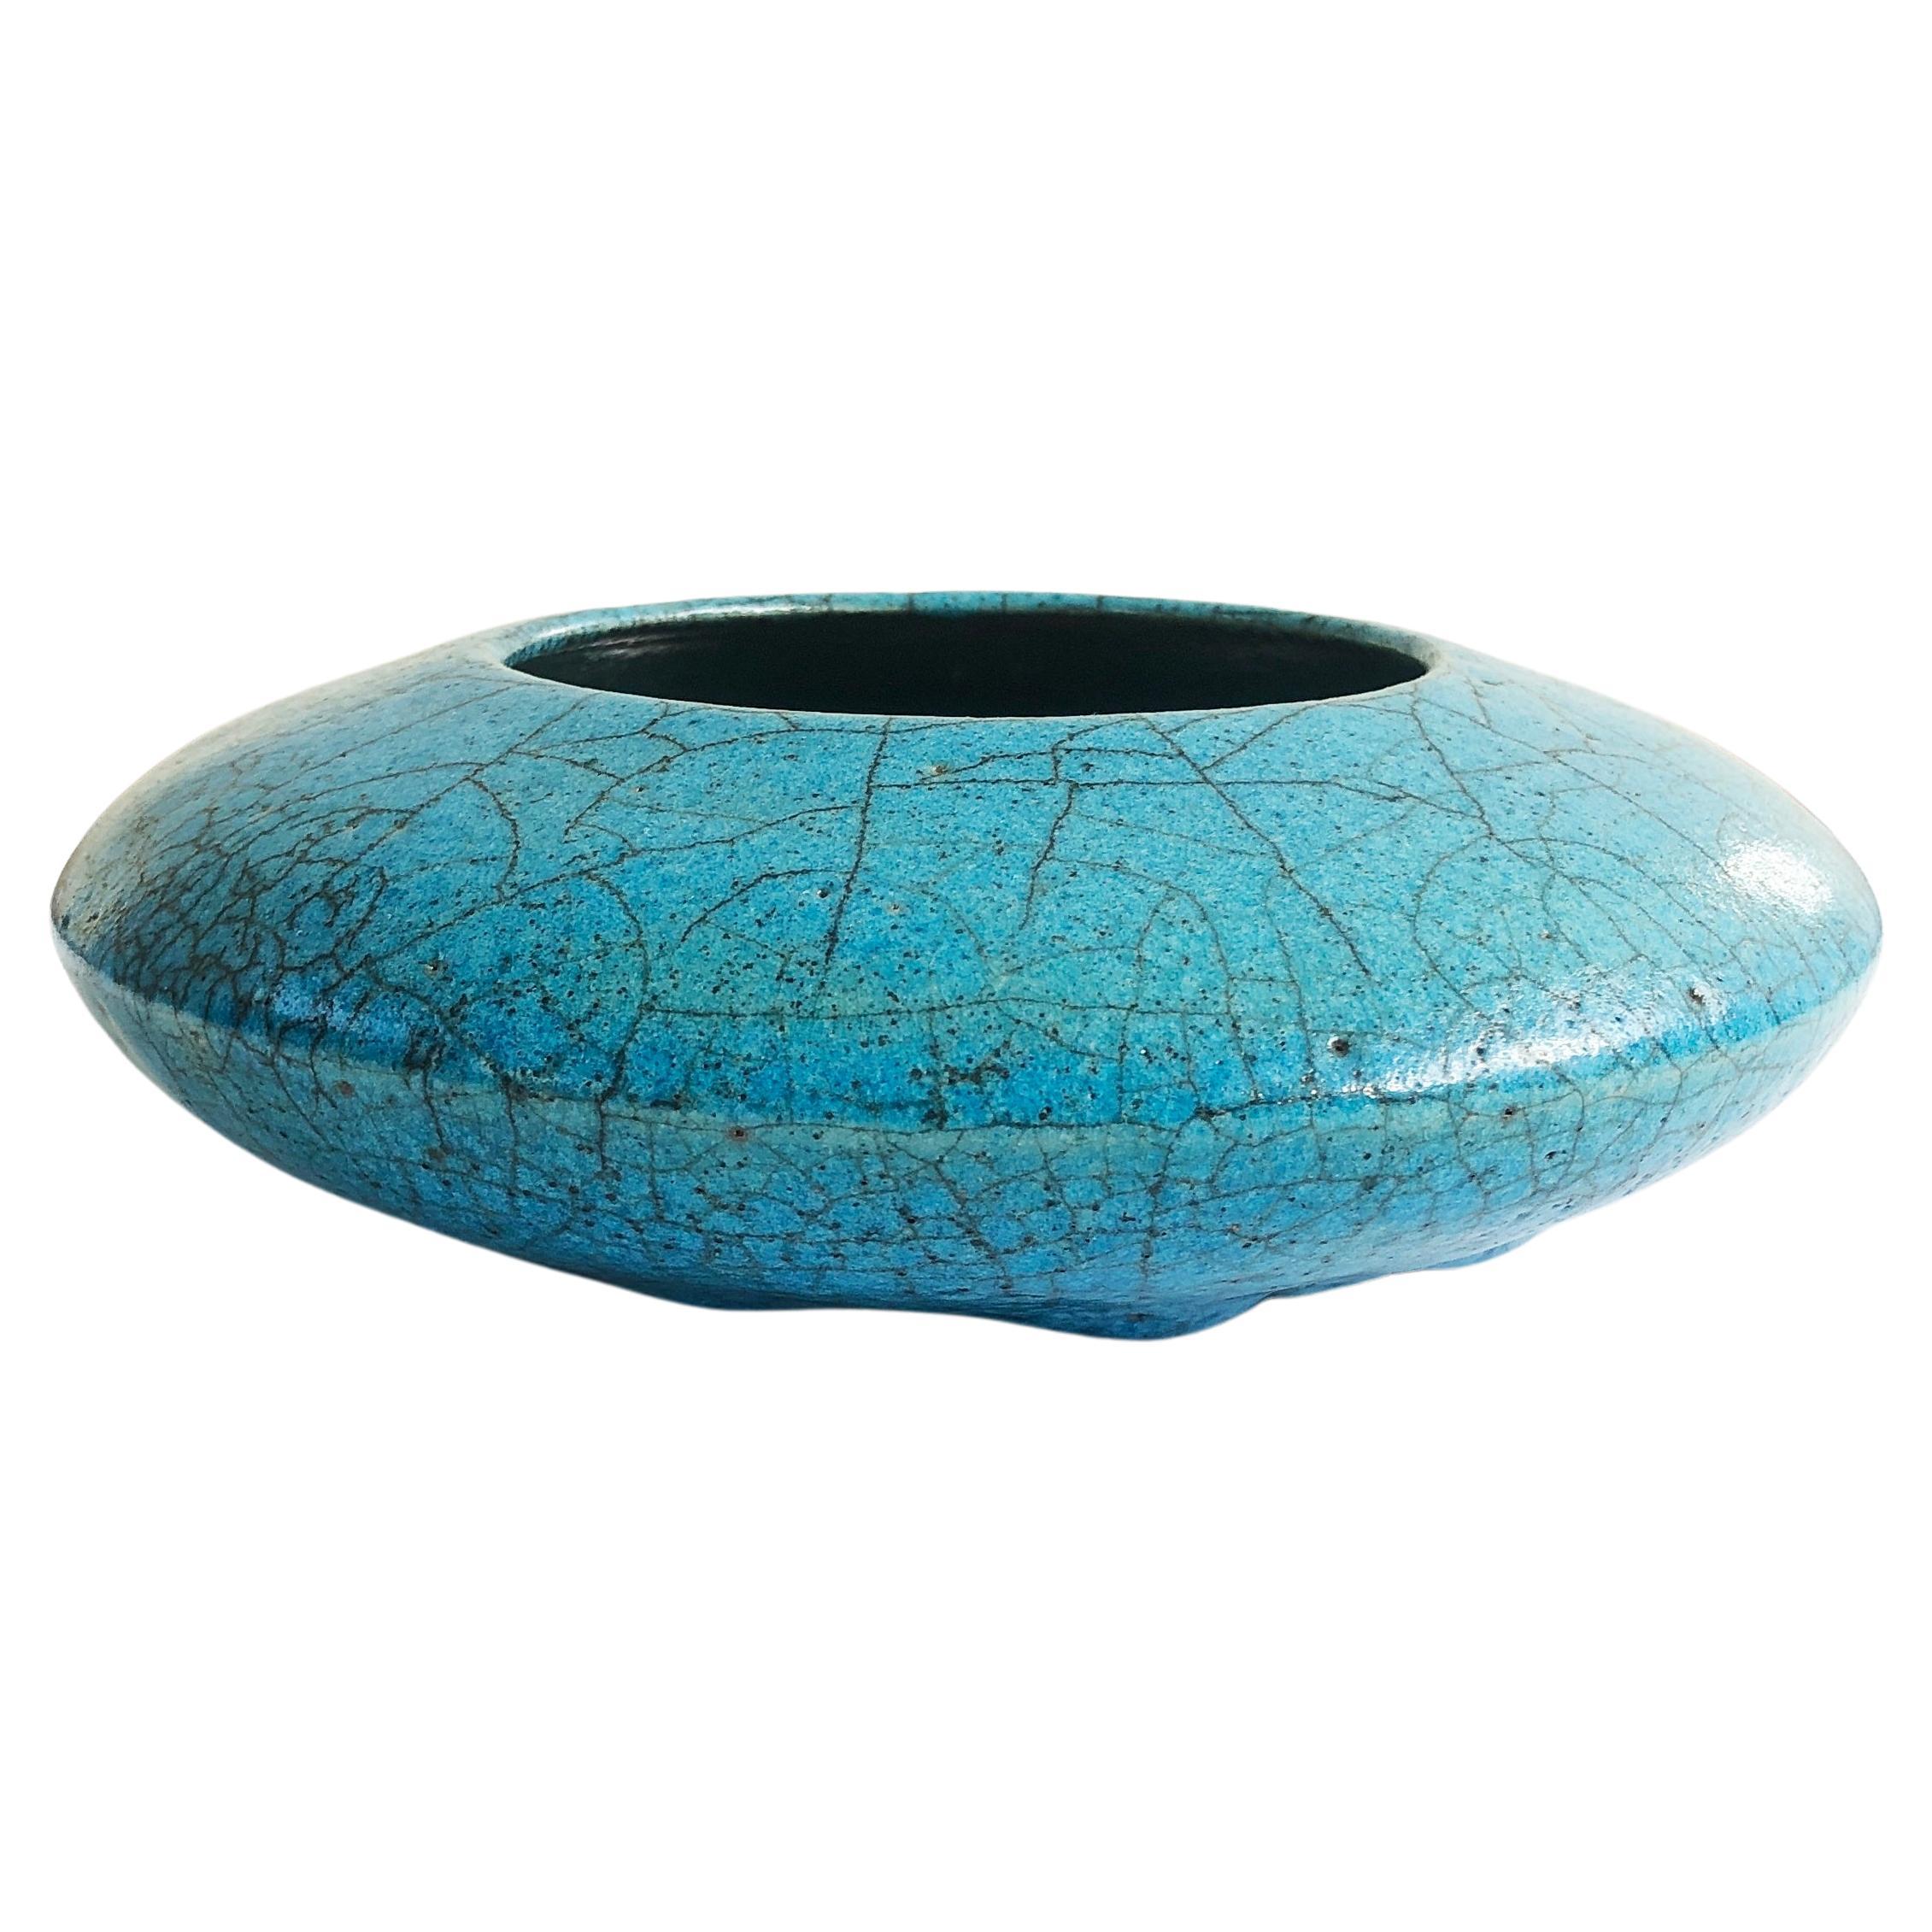 Turquoise Raku Ceramic Vase Discus Japanese Style, ca. 1975, possibly Germany For Sale